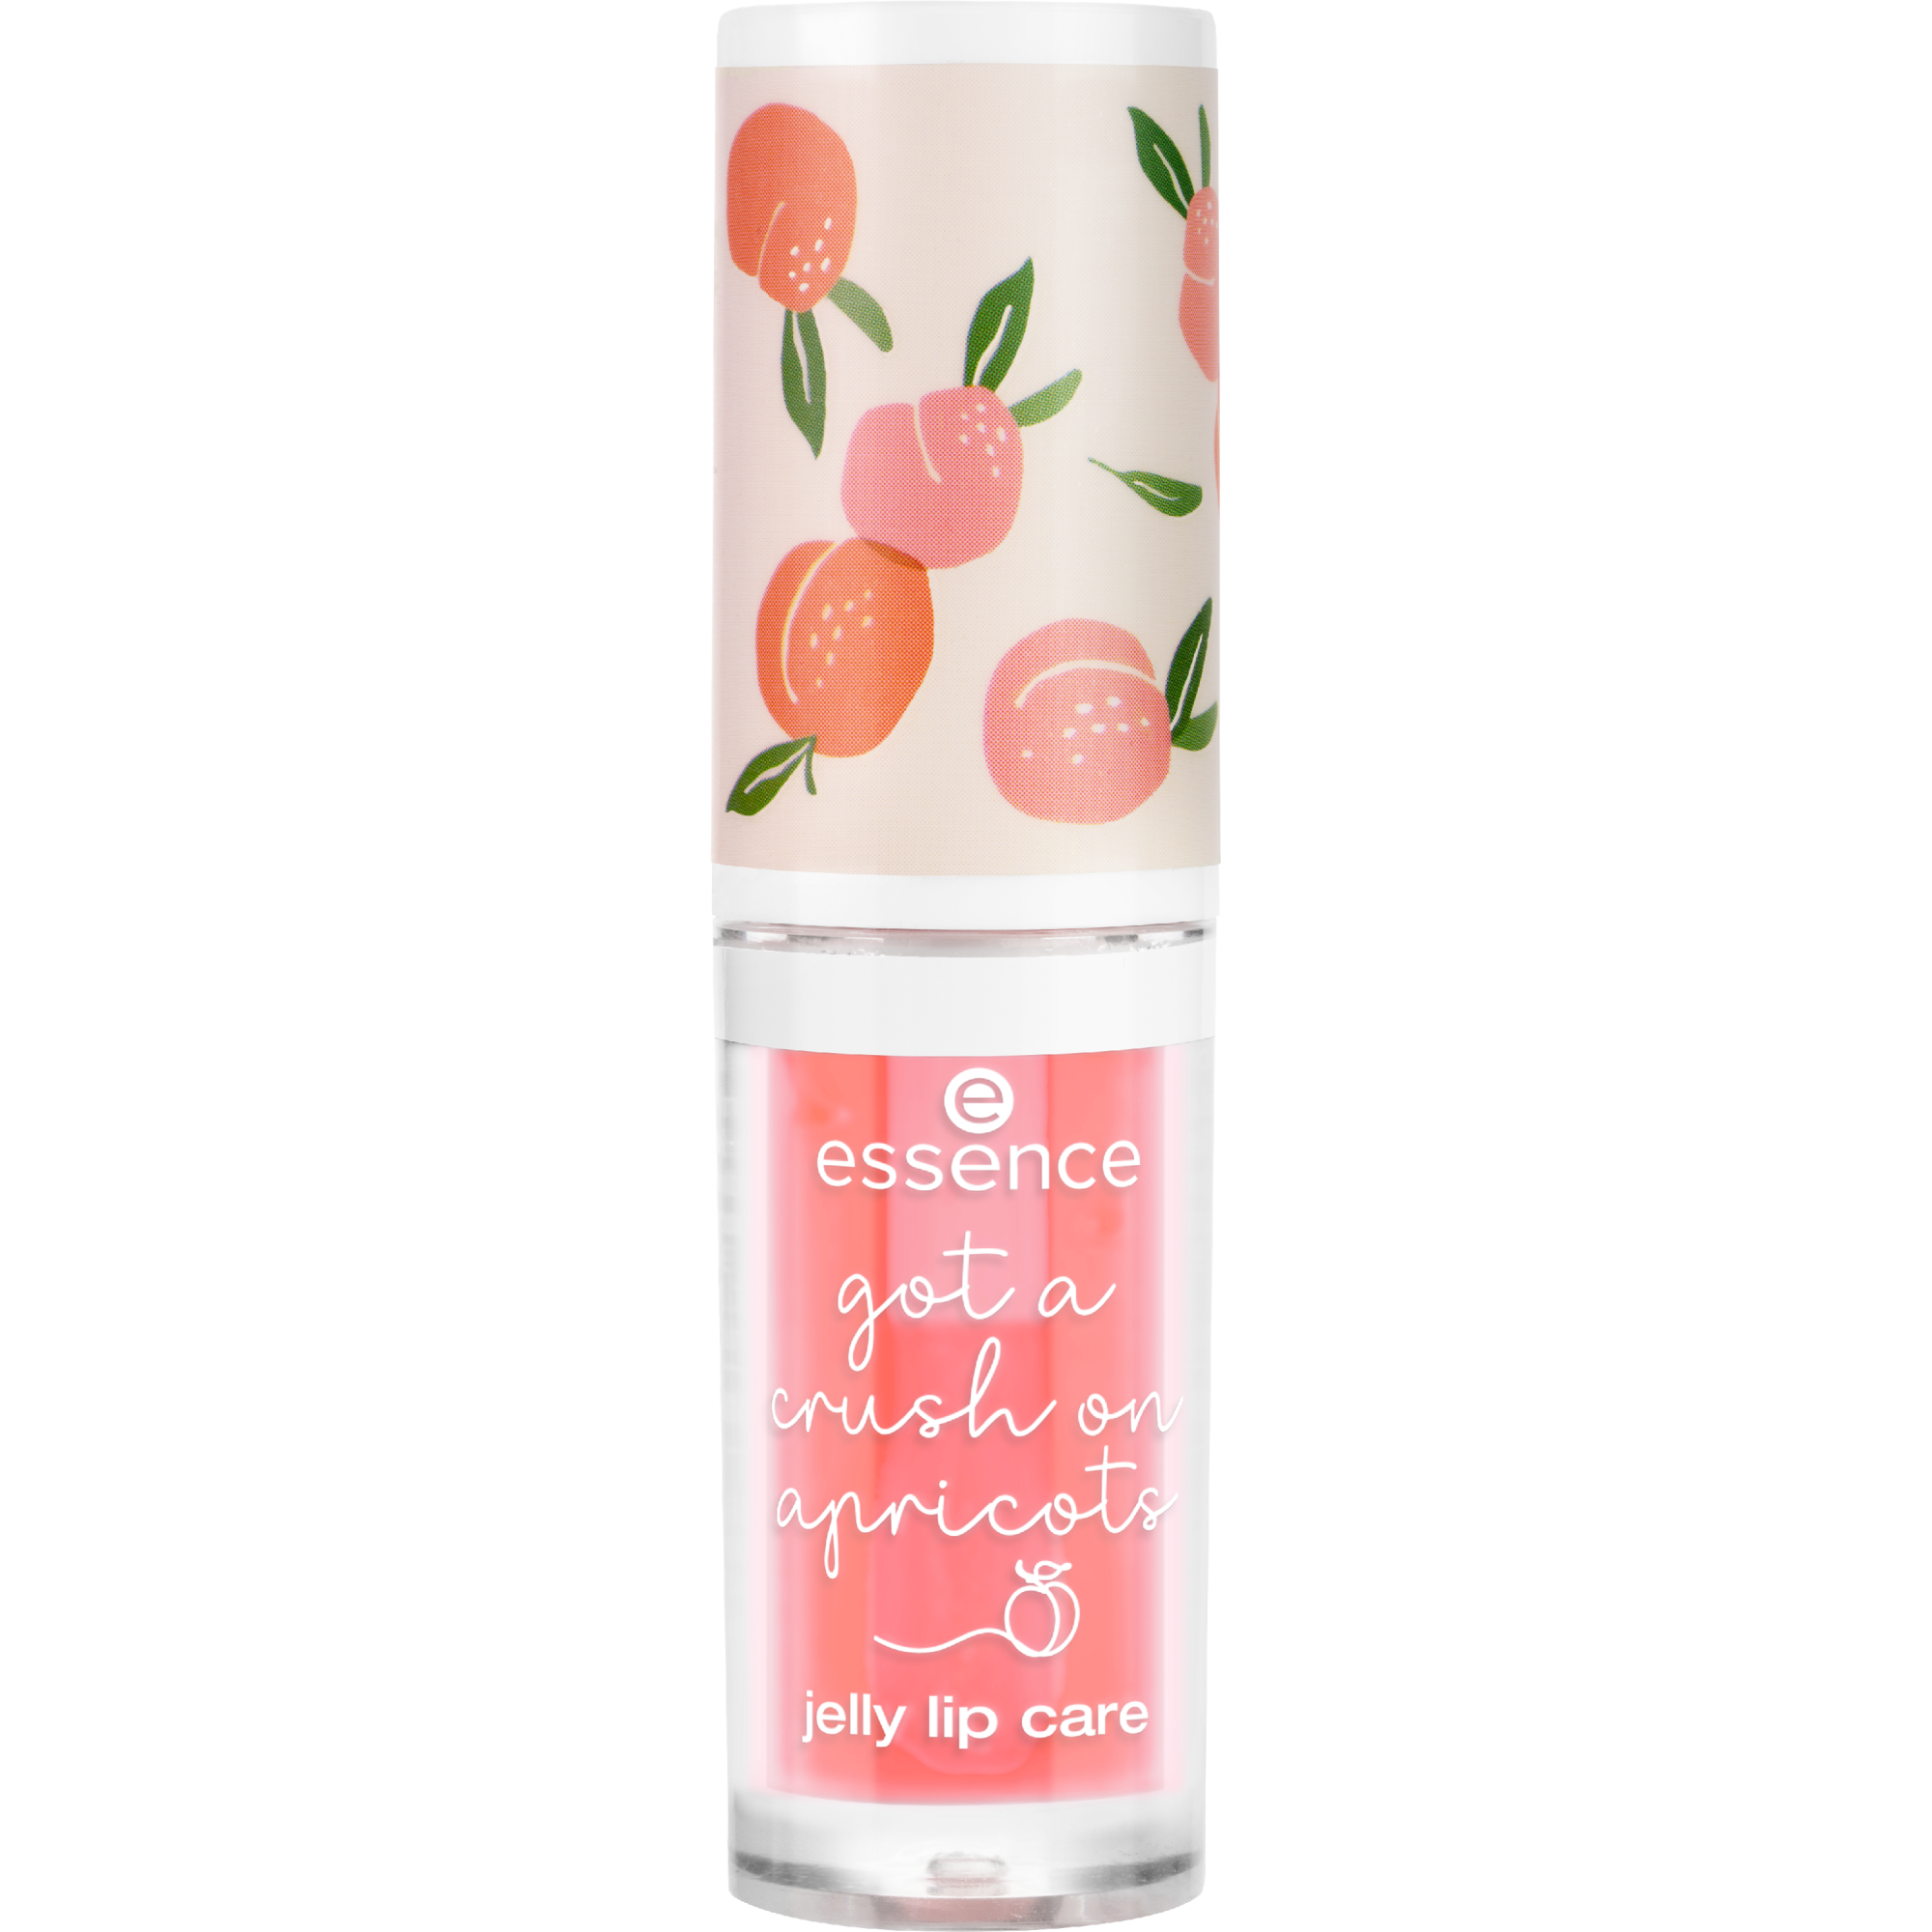 balsam do ust got a crush on apricots jelly lip care